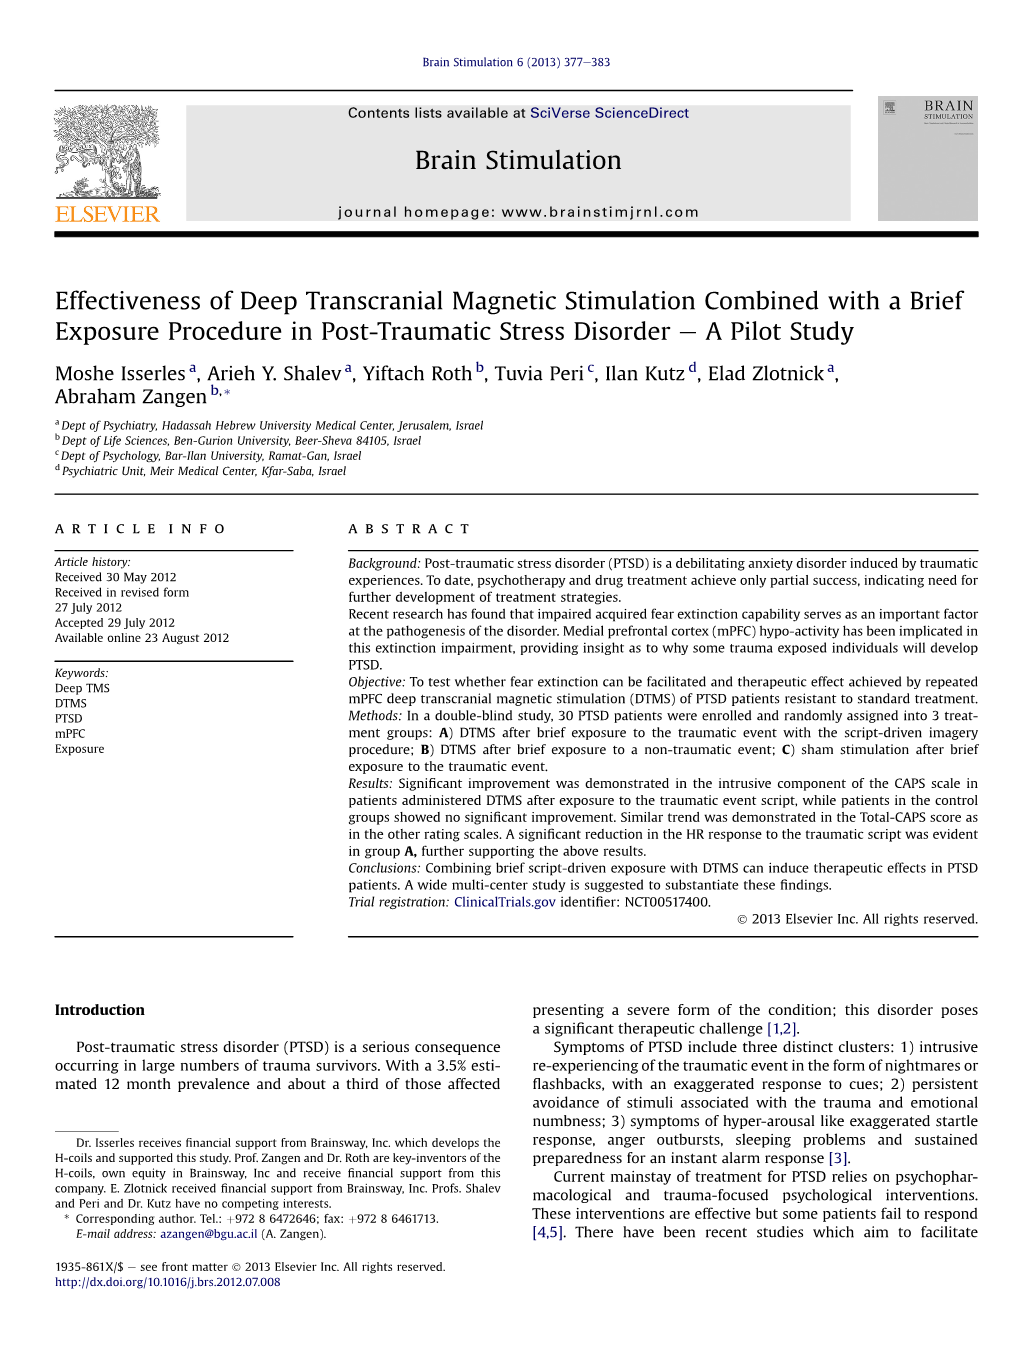 Effectiveness of Deep Transcranial Magnetic Stimulation Combined with a Brief Exposure Procedure in Post-Traumatic Stress Disorder E a Pilot Study